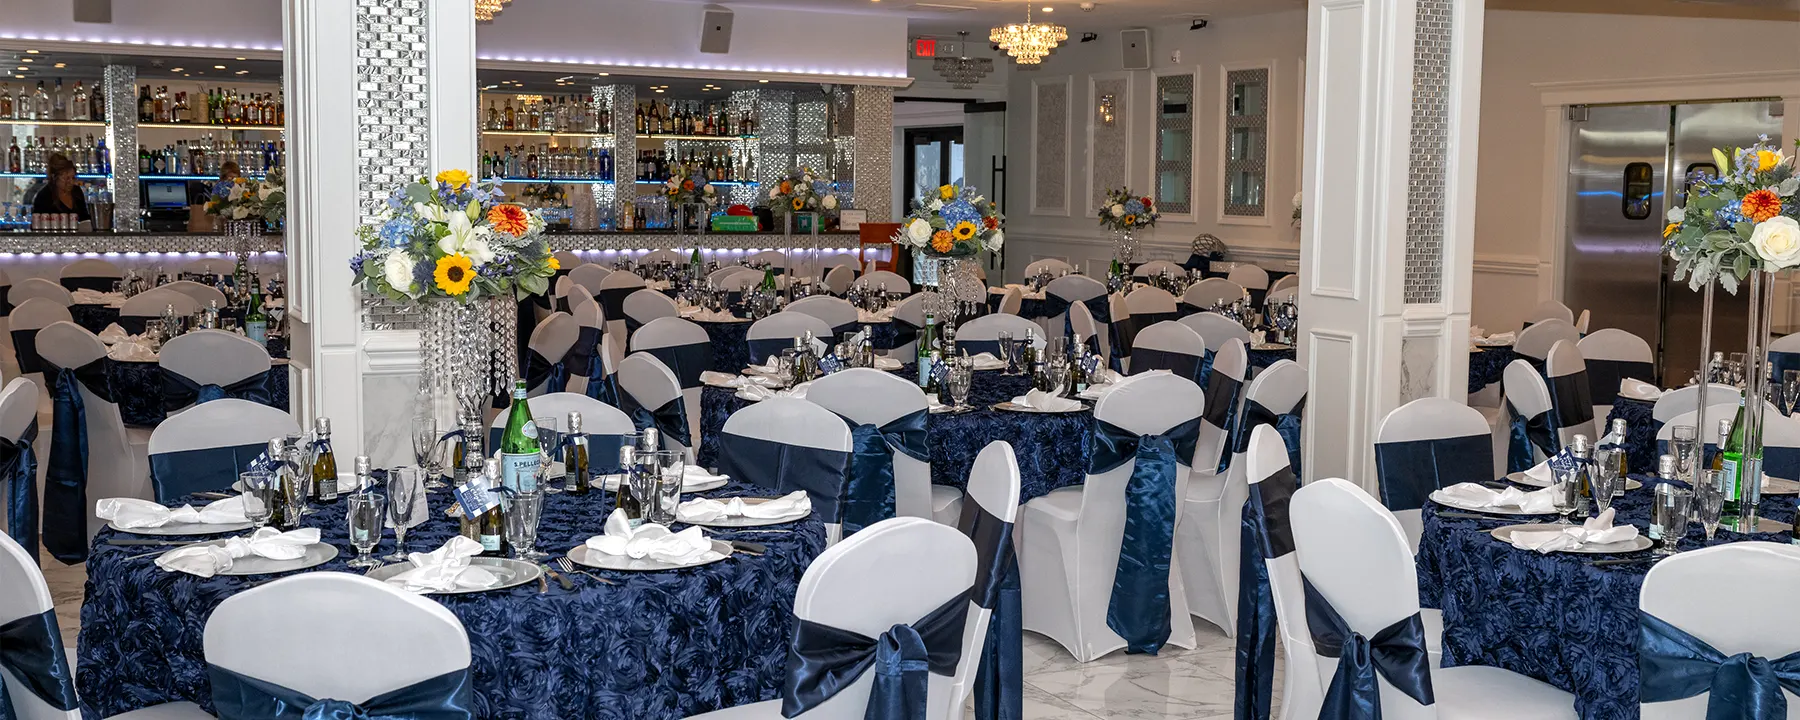 Overview of room with beautiful blue and white table settings